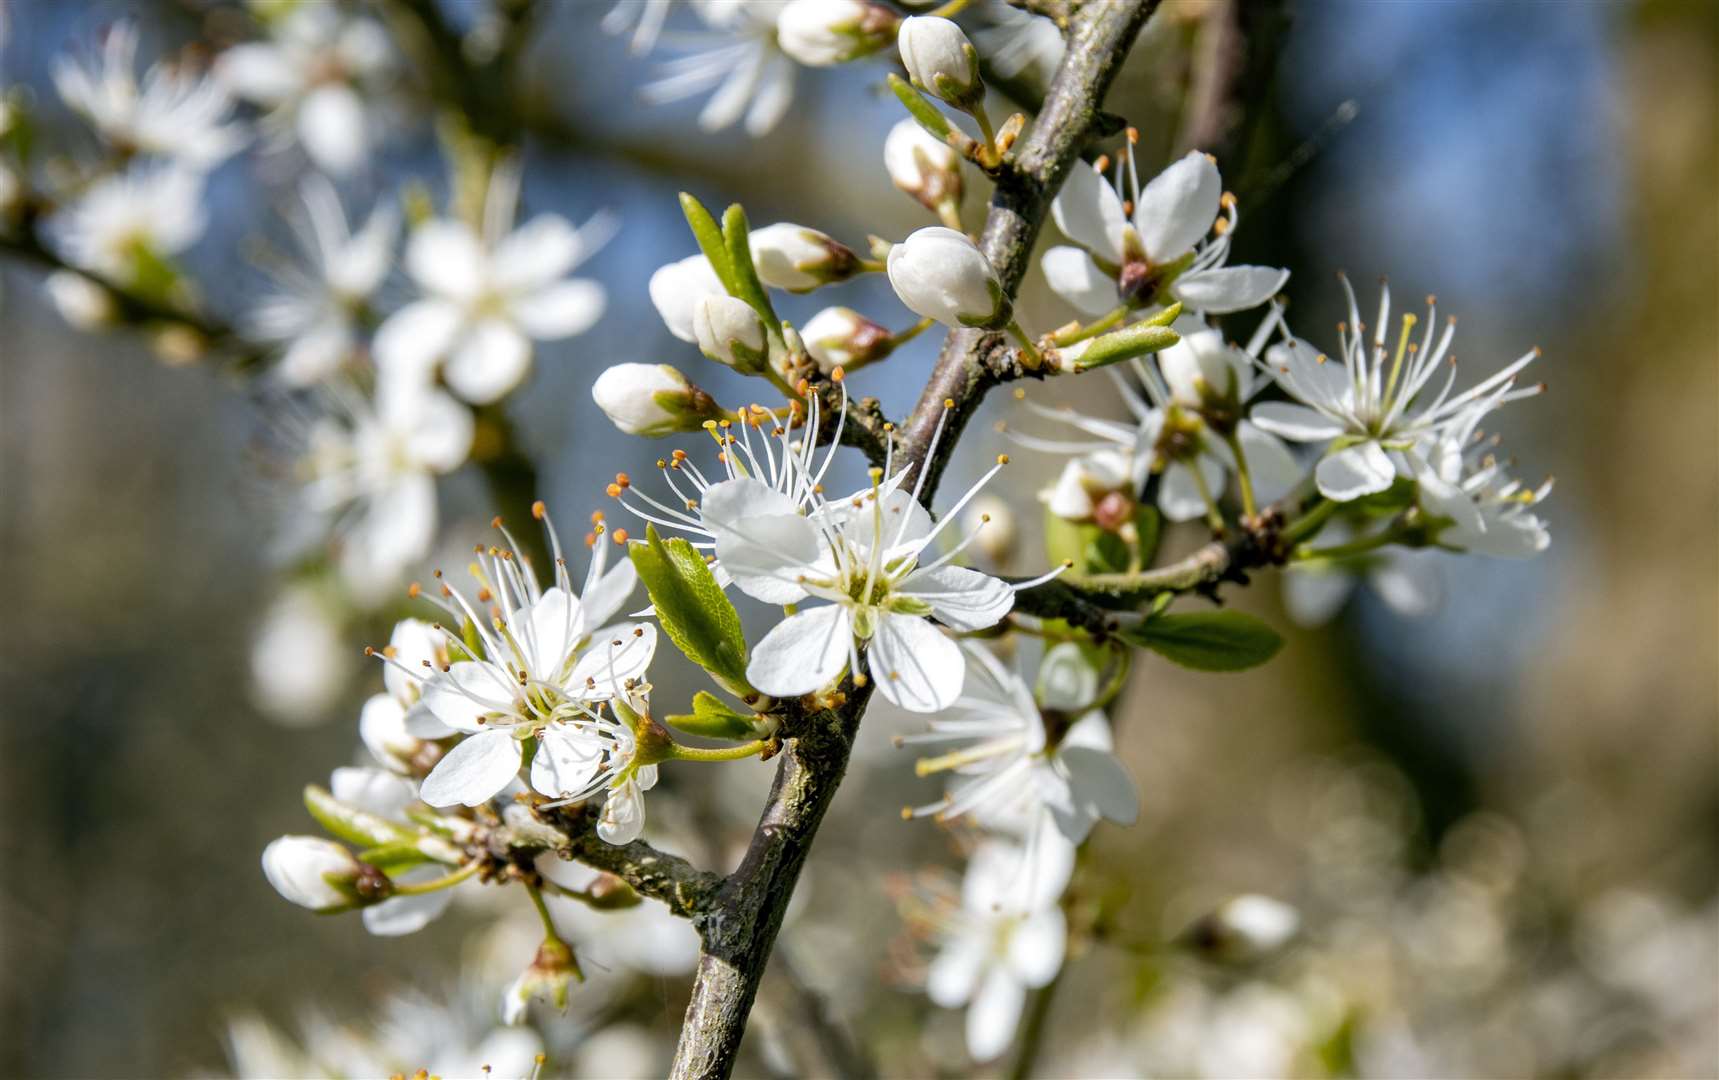 Blackthorn in bloom. Picture: National Trust / Hugh Mothersole